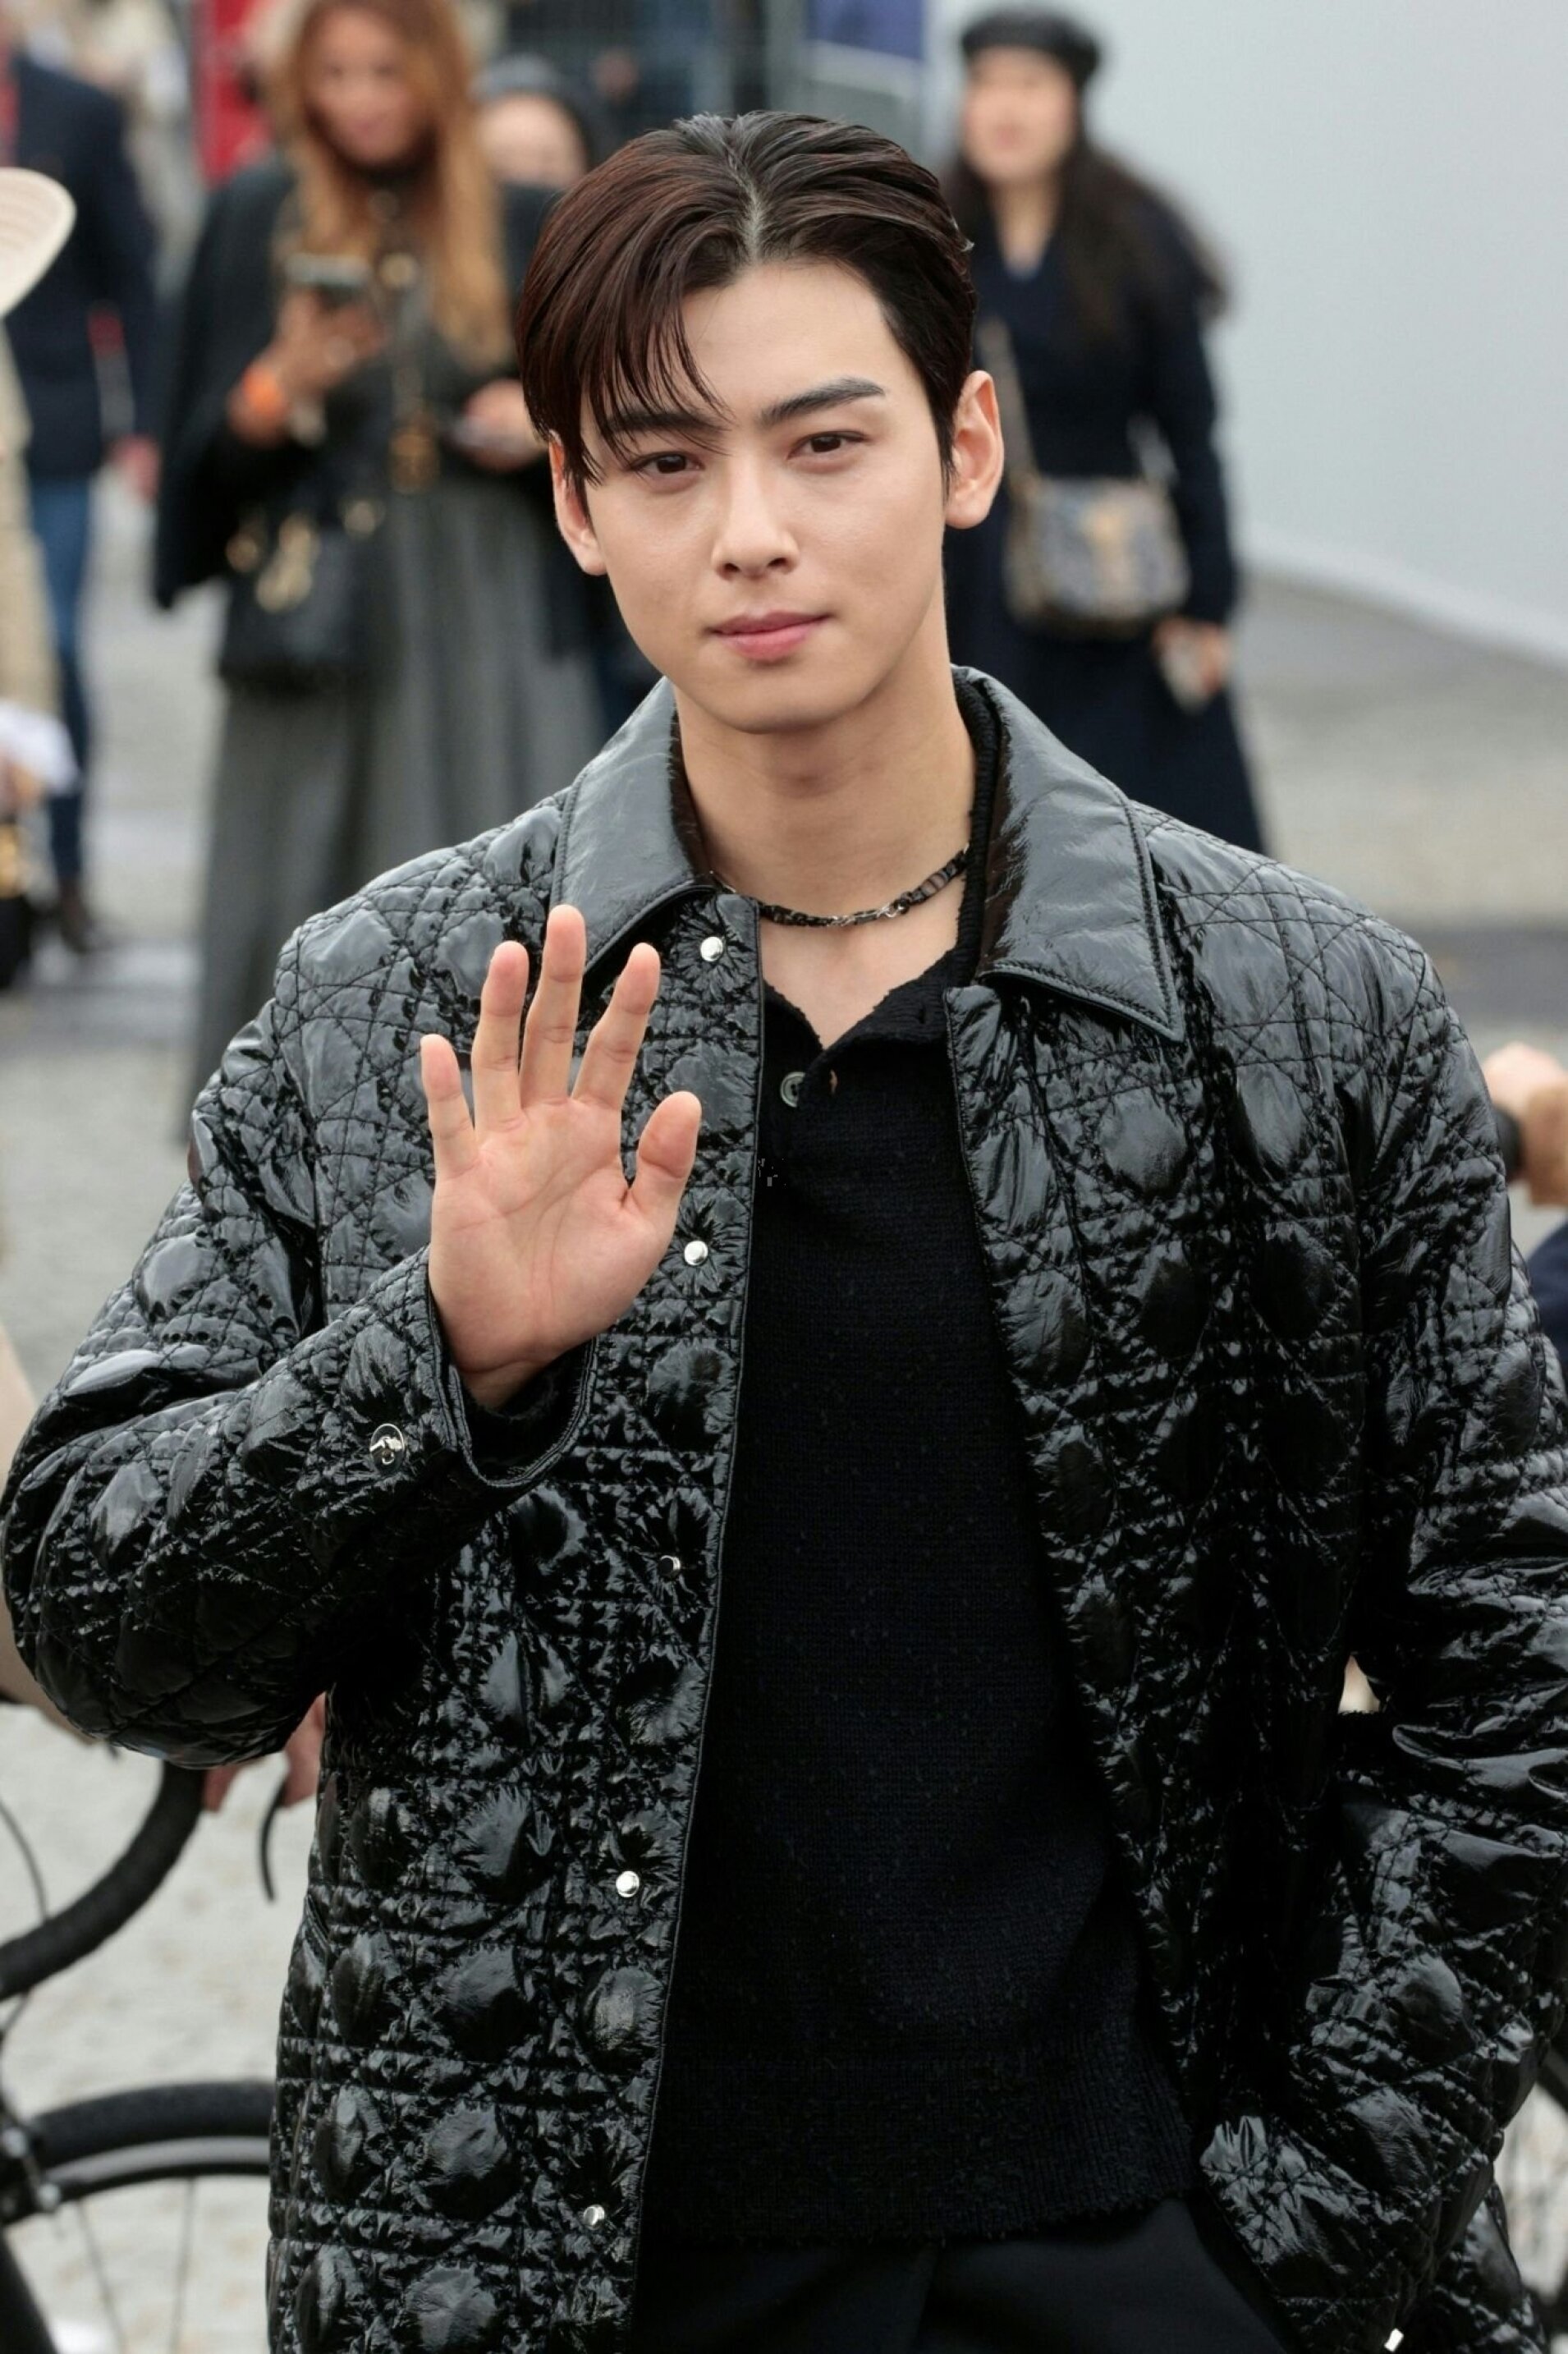 Even if it's Cha Eun Woo, Netizens raise eyebrows at the outfit Cha Eun  Woo wore at the recent 'Dior' fashion show